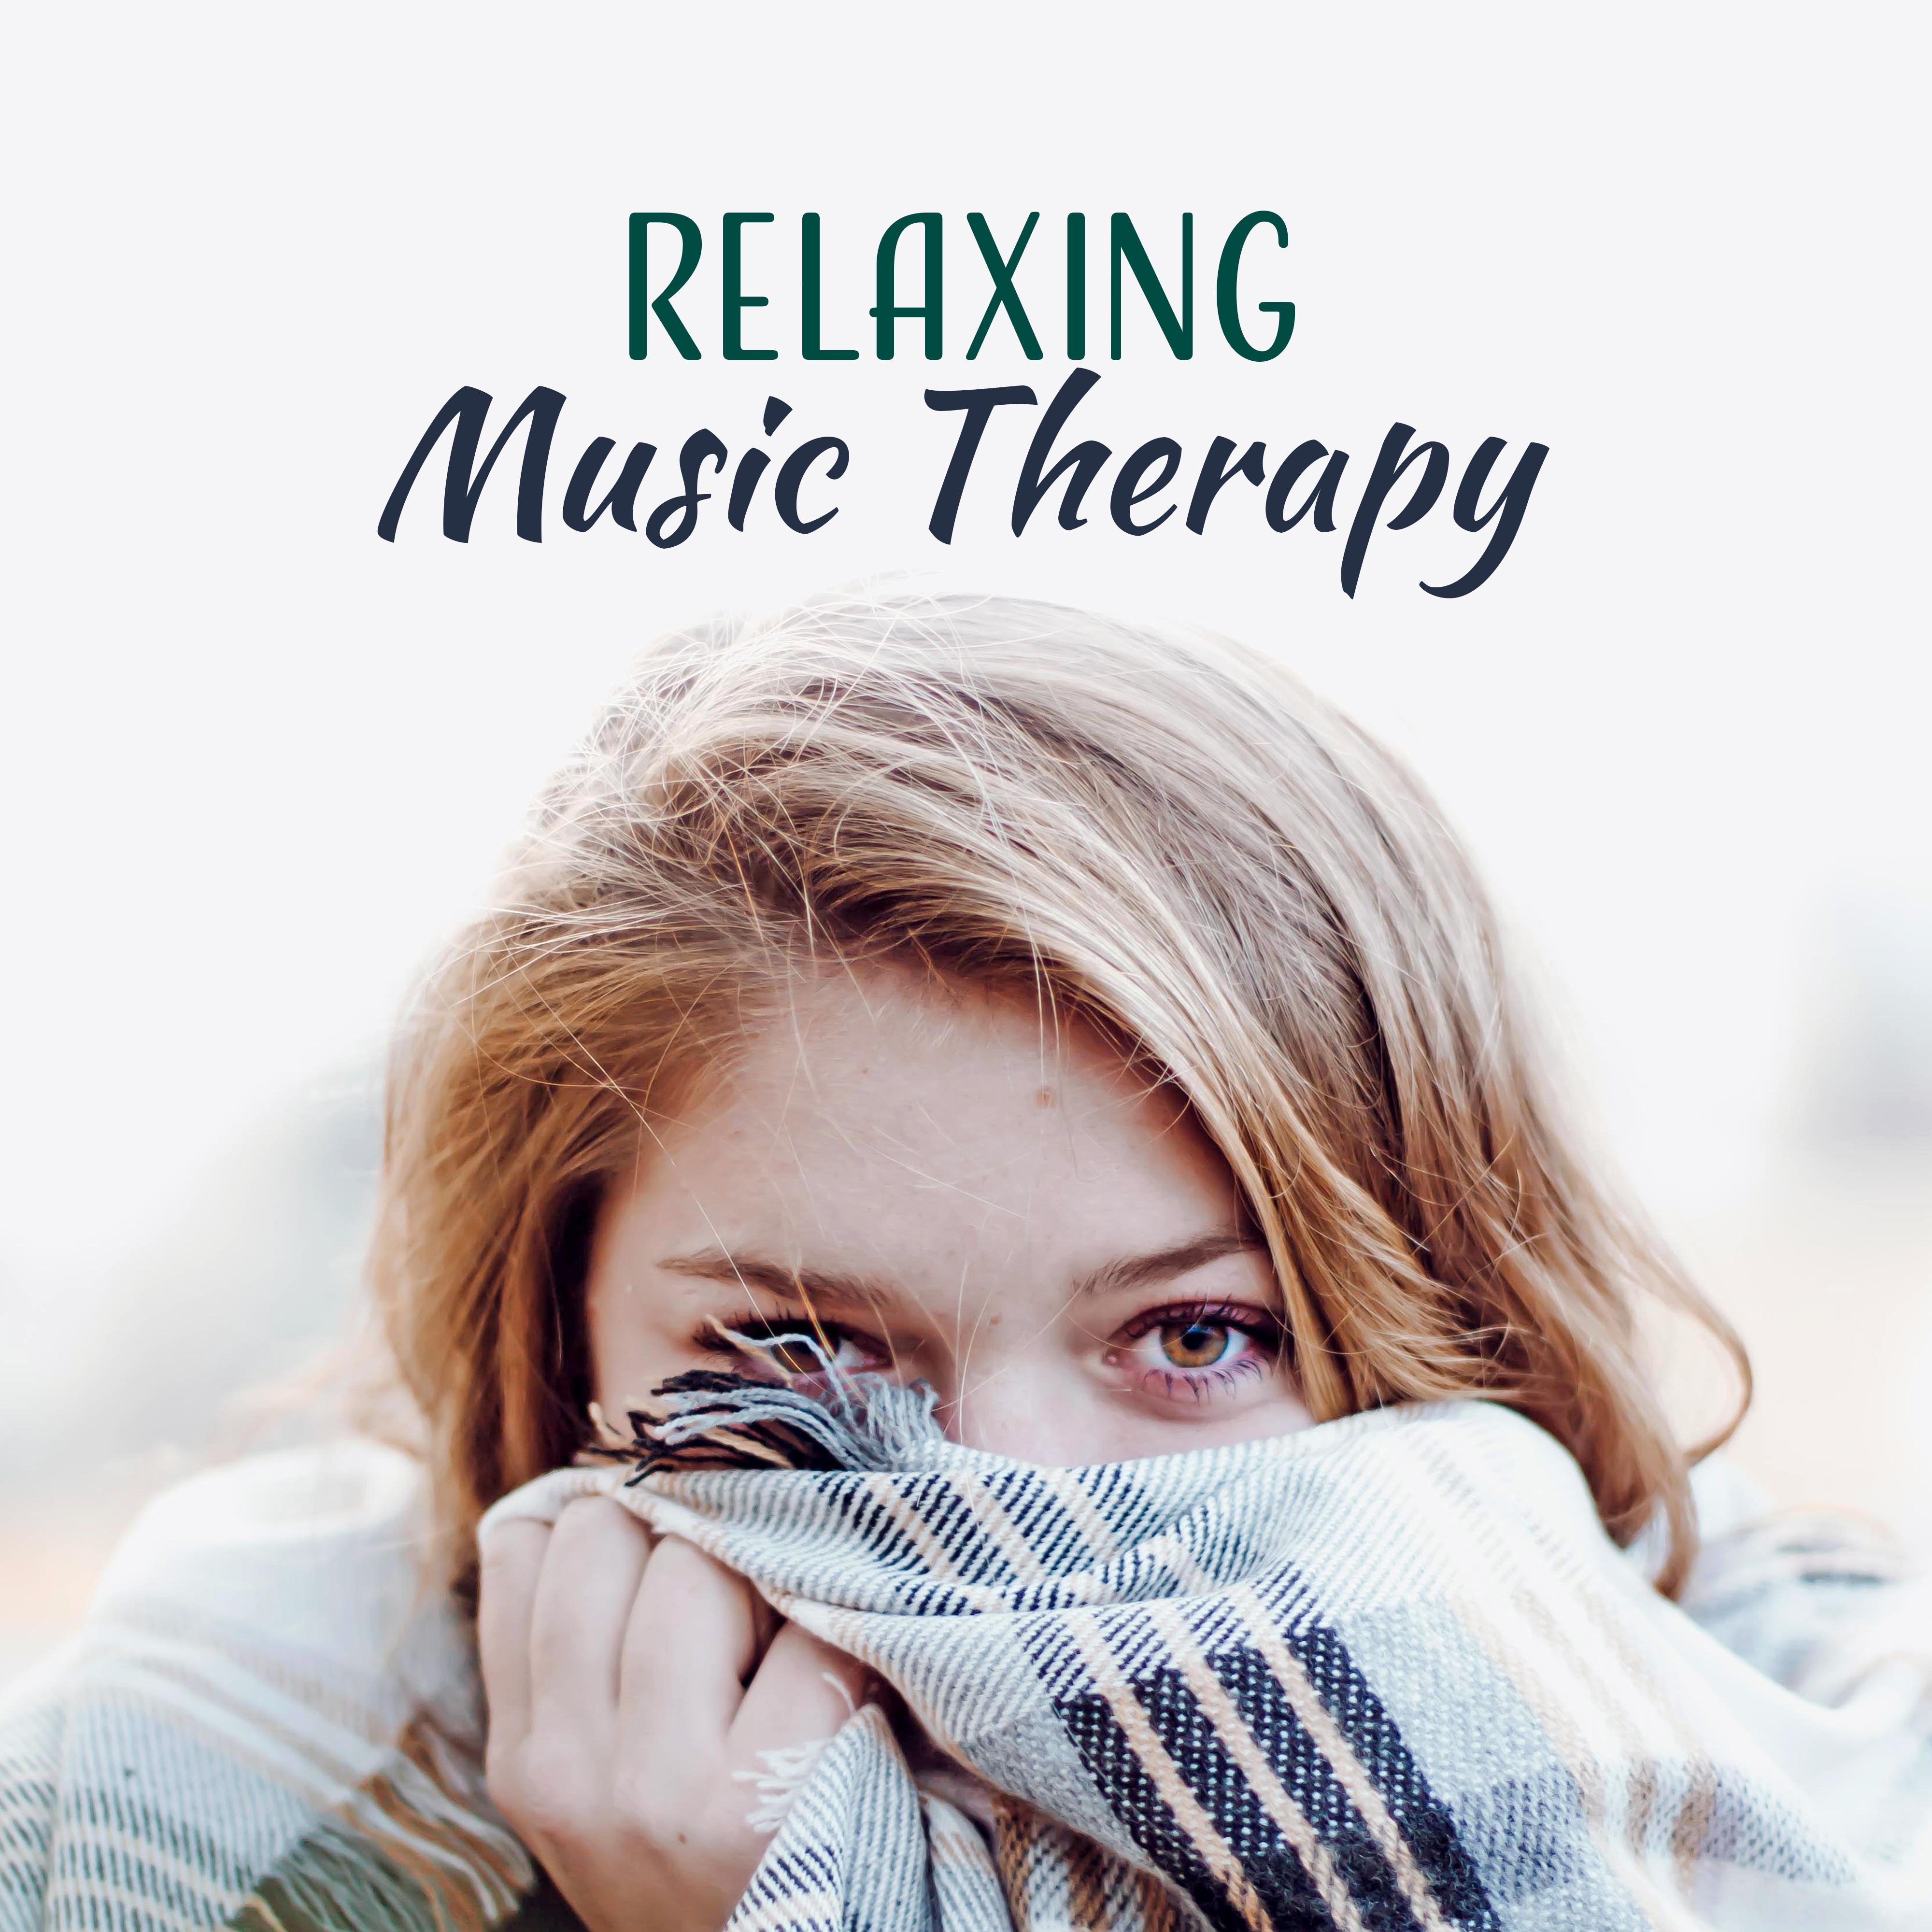 Relaxing Music Therapy – Jazz for Depression, Happy Songs, Anti Stress Sounds, Good Energy